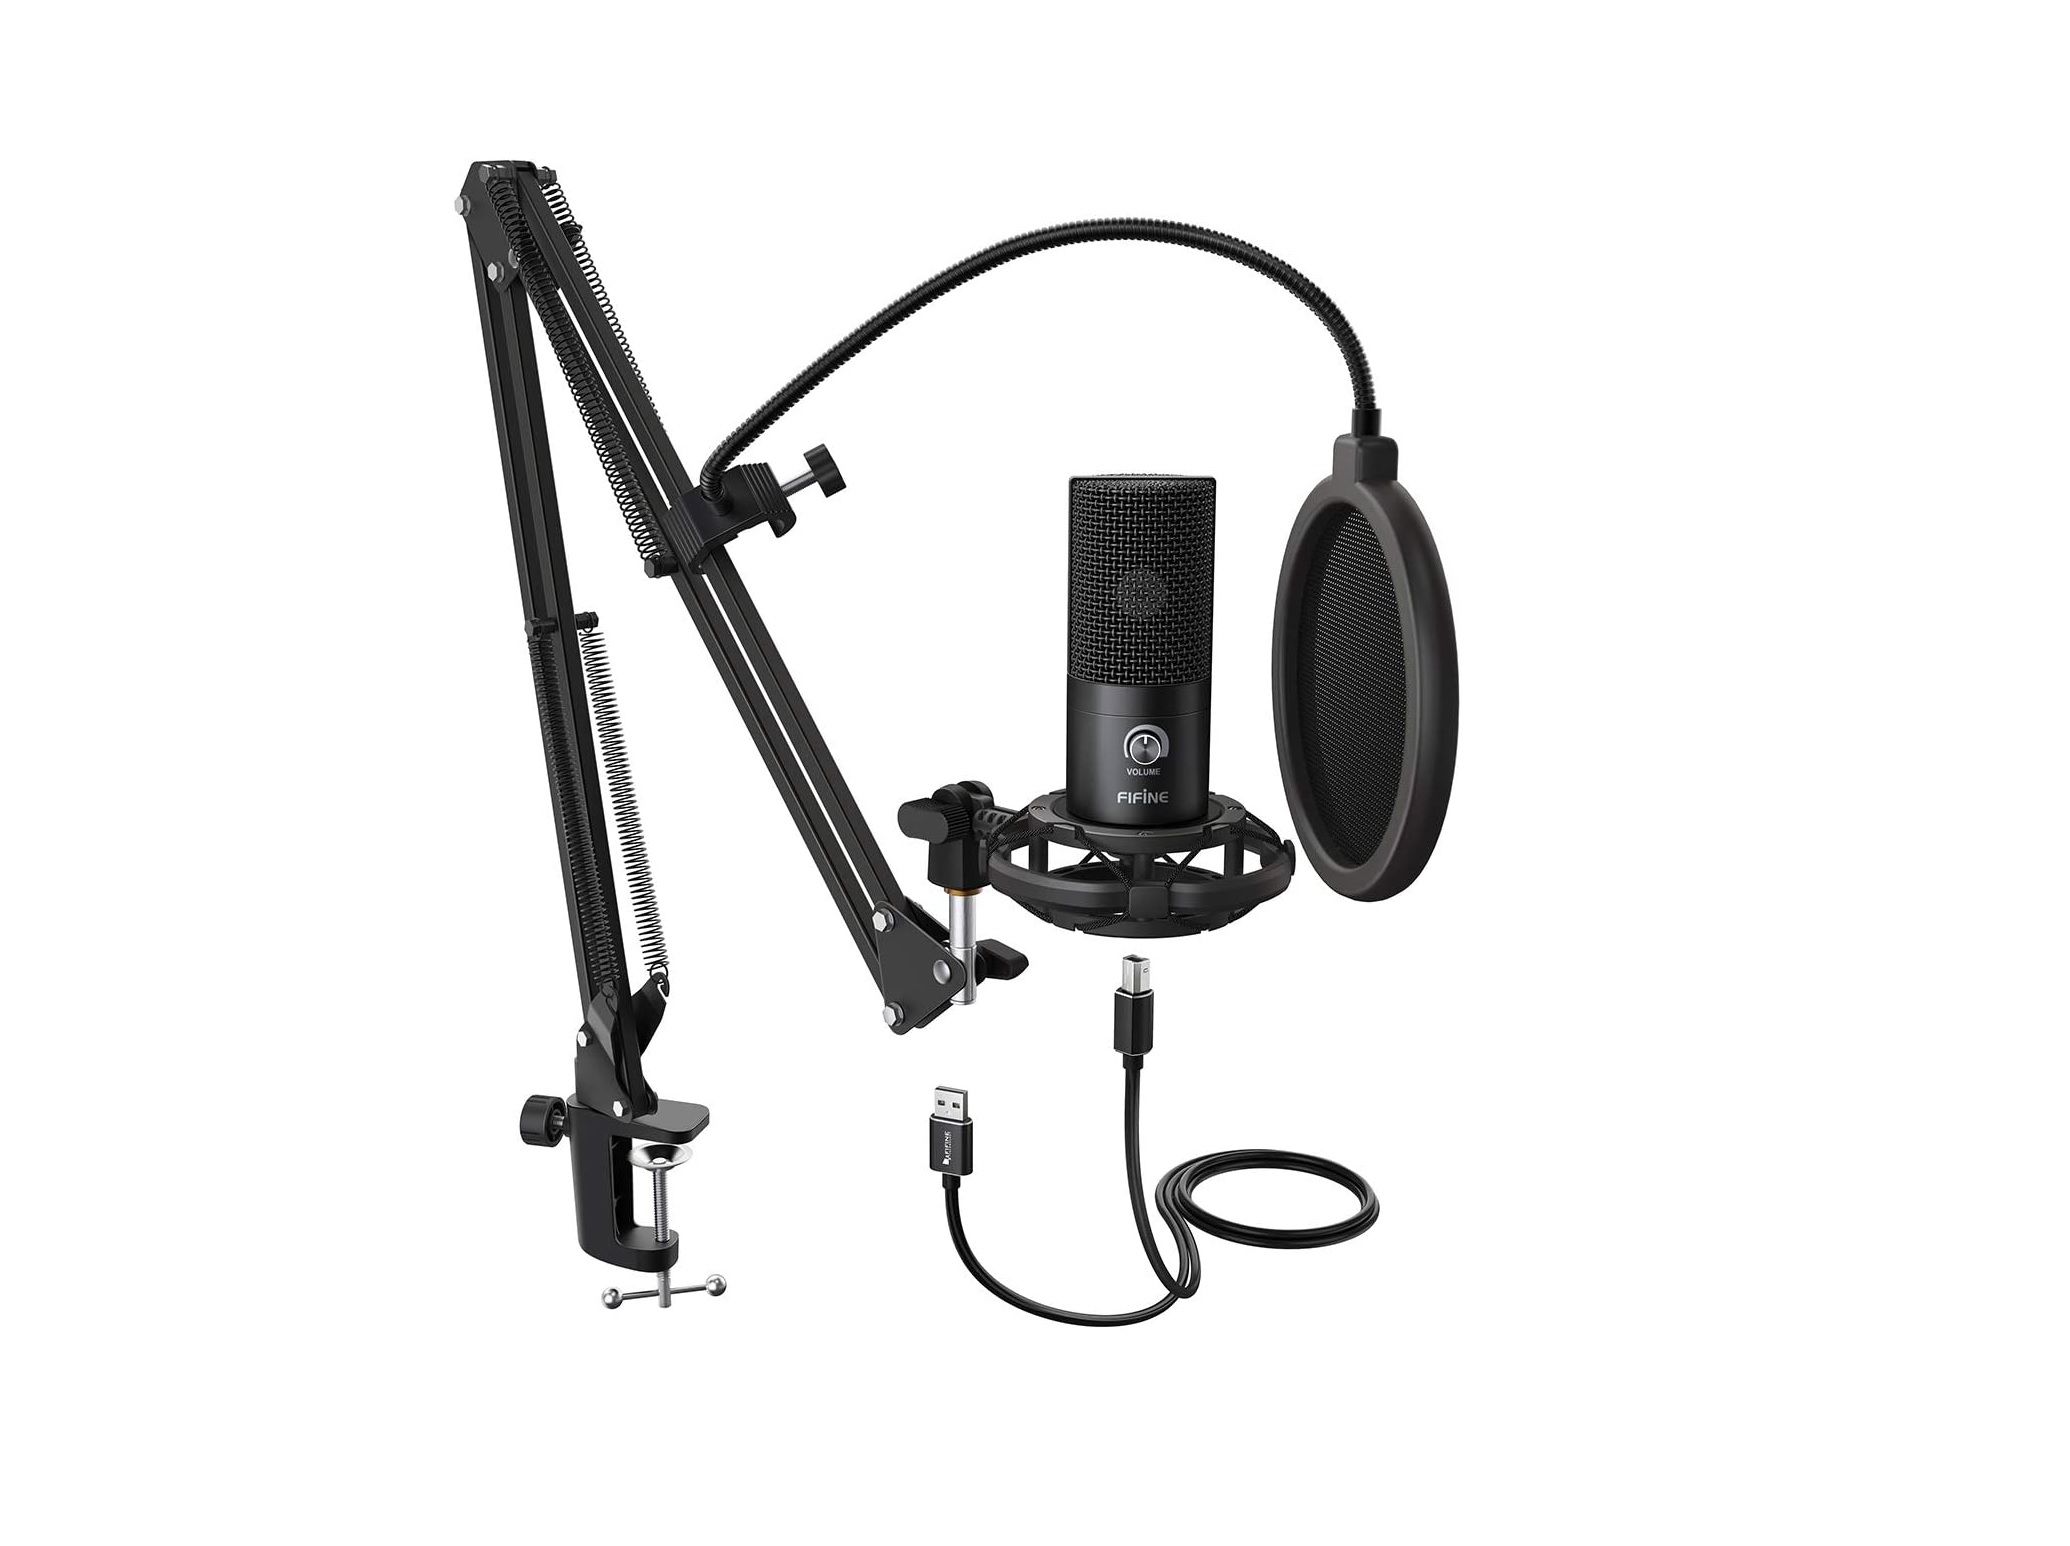 the fifine t669 microphone kit featuring a pop filter and shock mount